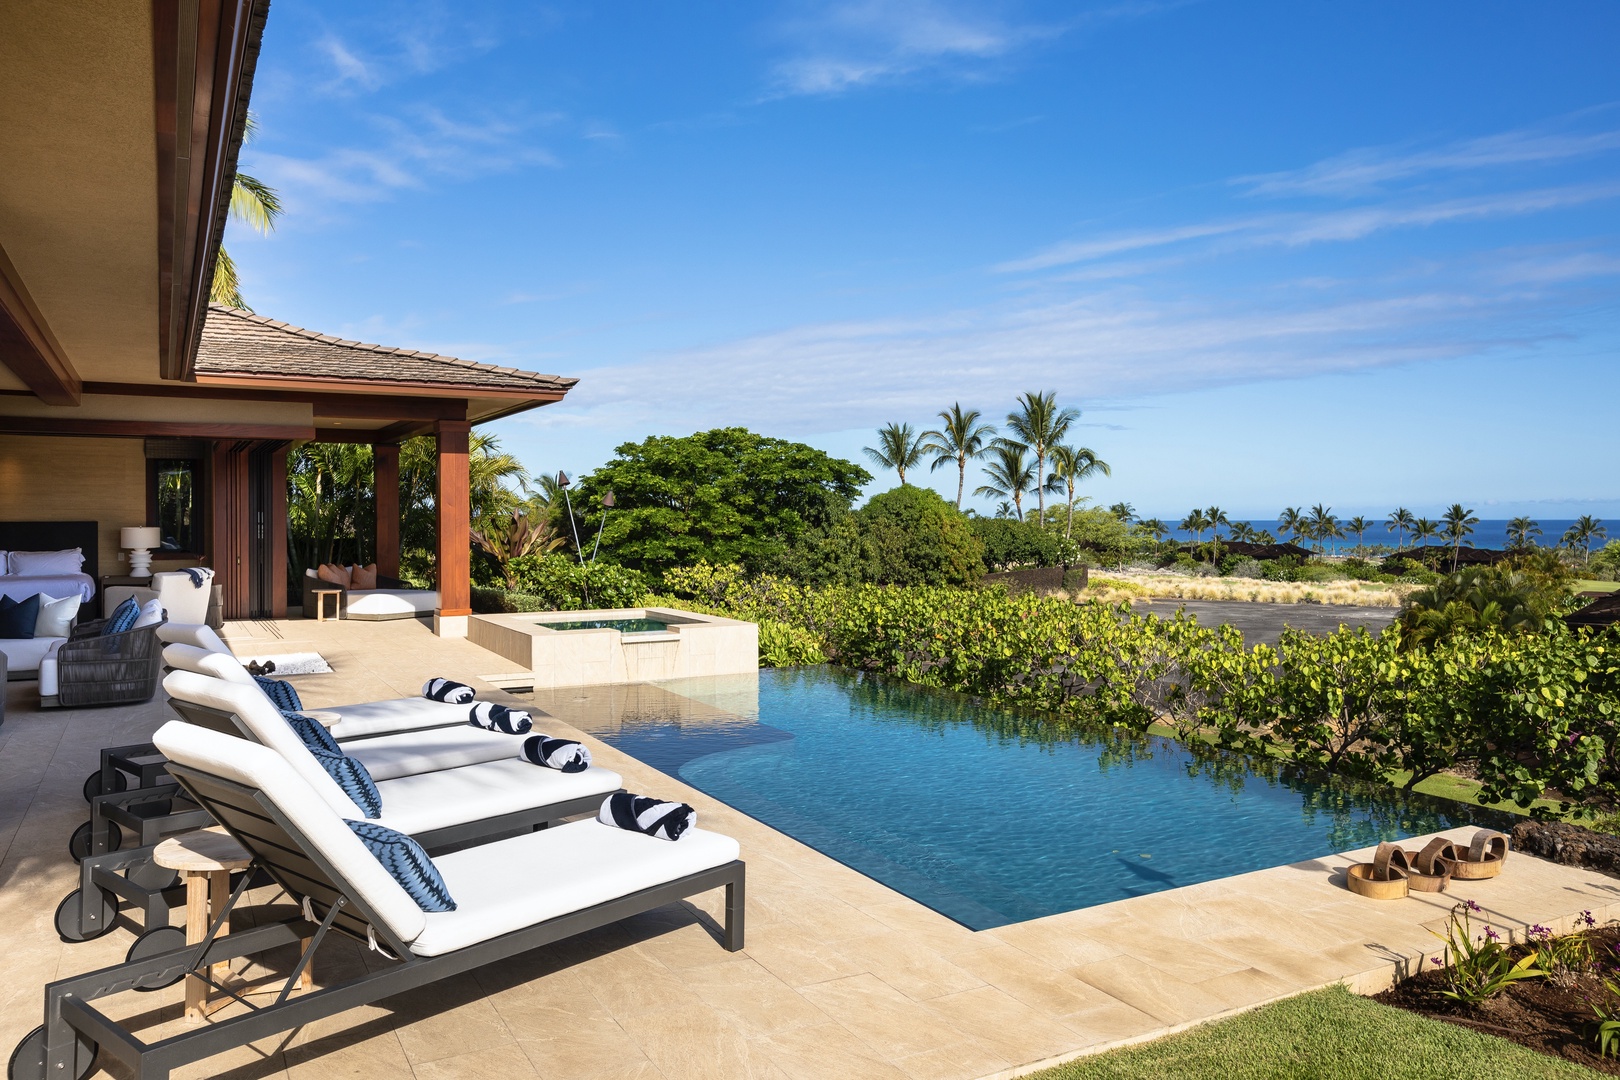 Kailua Kona Vacation Rentals, 4BD Kulanakauhale (3558) Estate Home at Four Seasons Resort at Hualalai - Gorgeous new construction luxury estate home professionally designed by Gina Willman Interiors with infinity pool, private spa and ocean views.